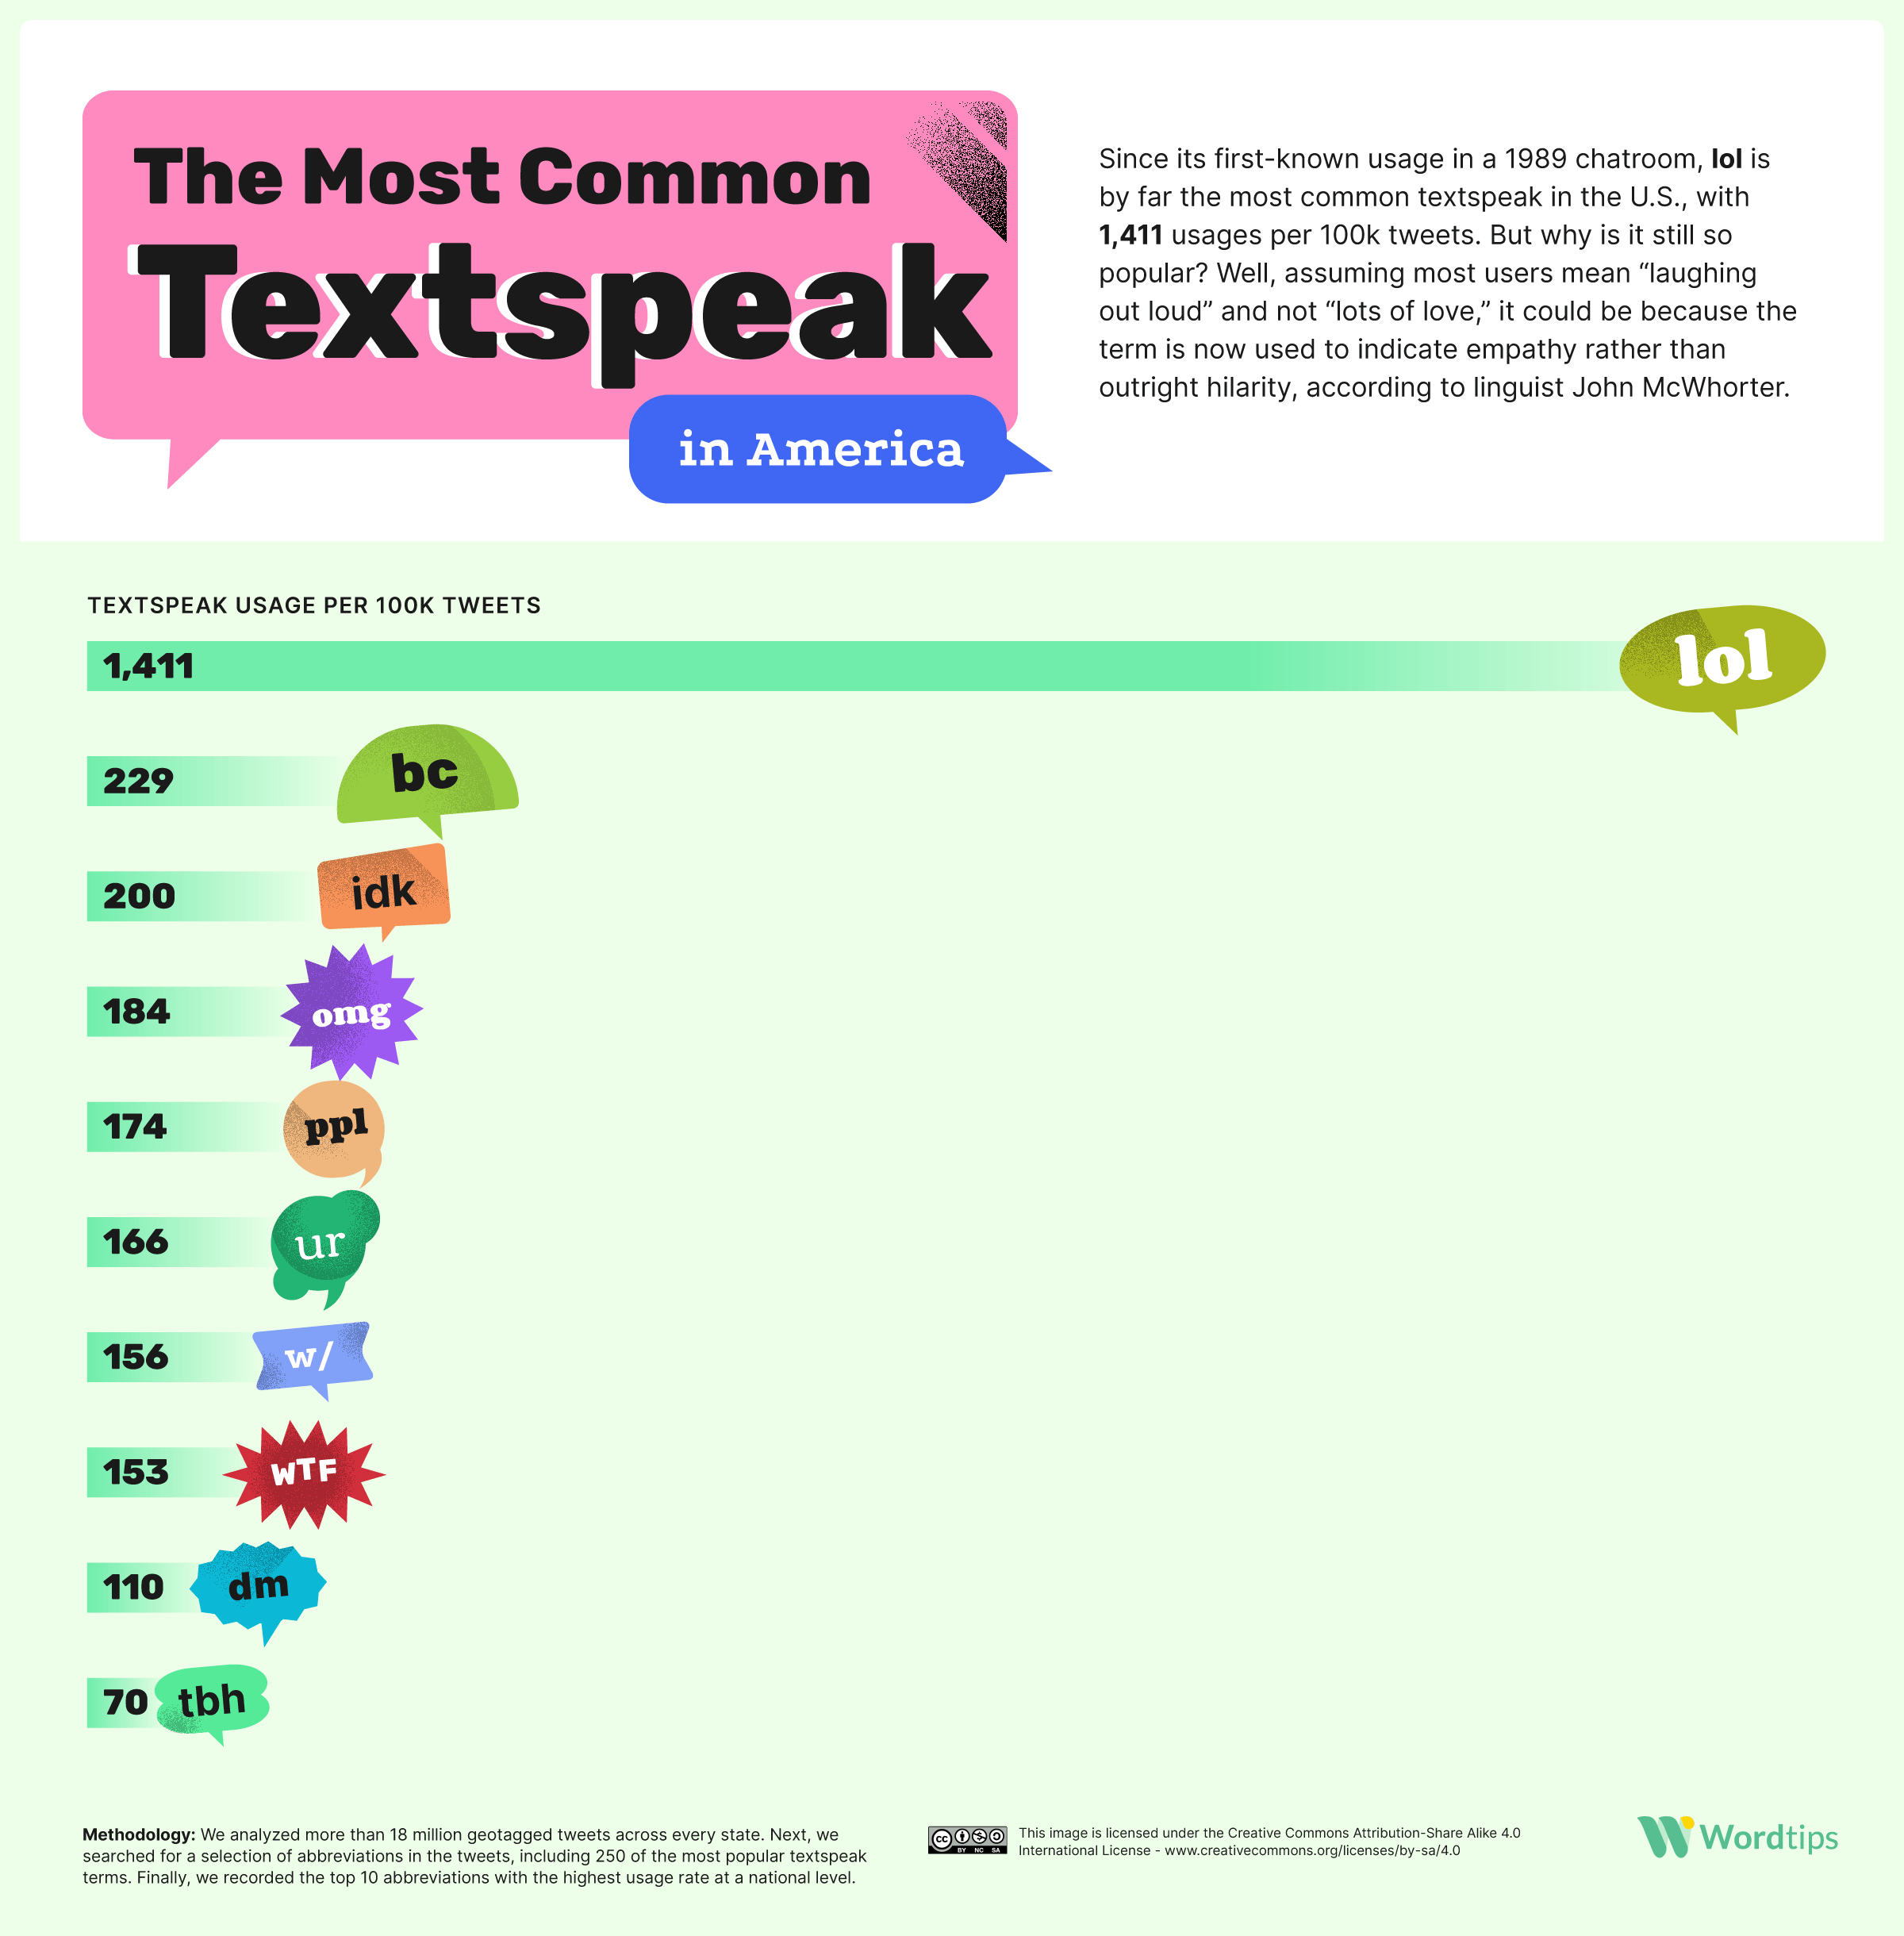 Top ten of the most frequently used chat abbreviations